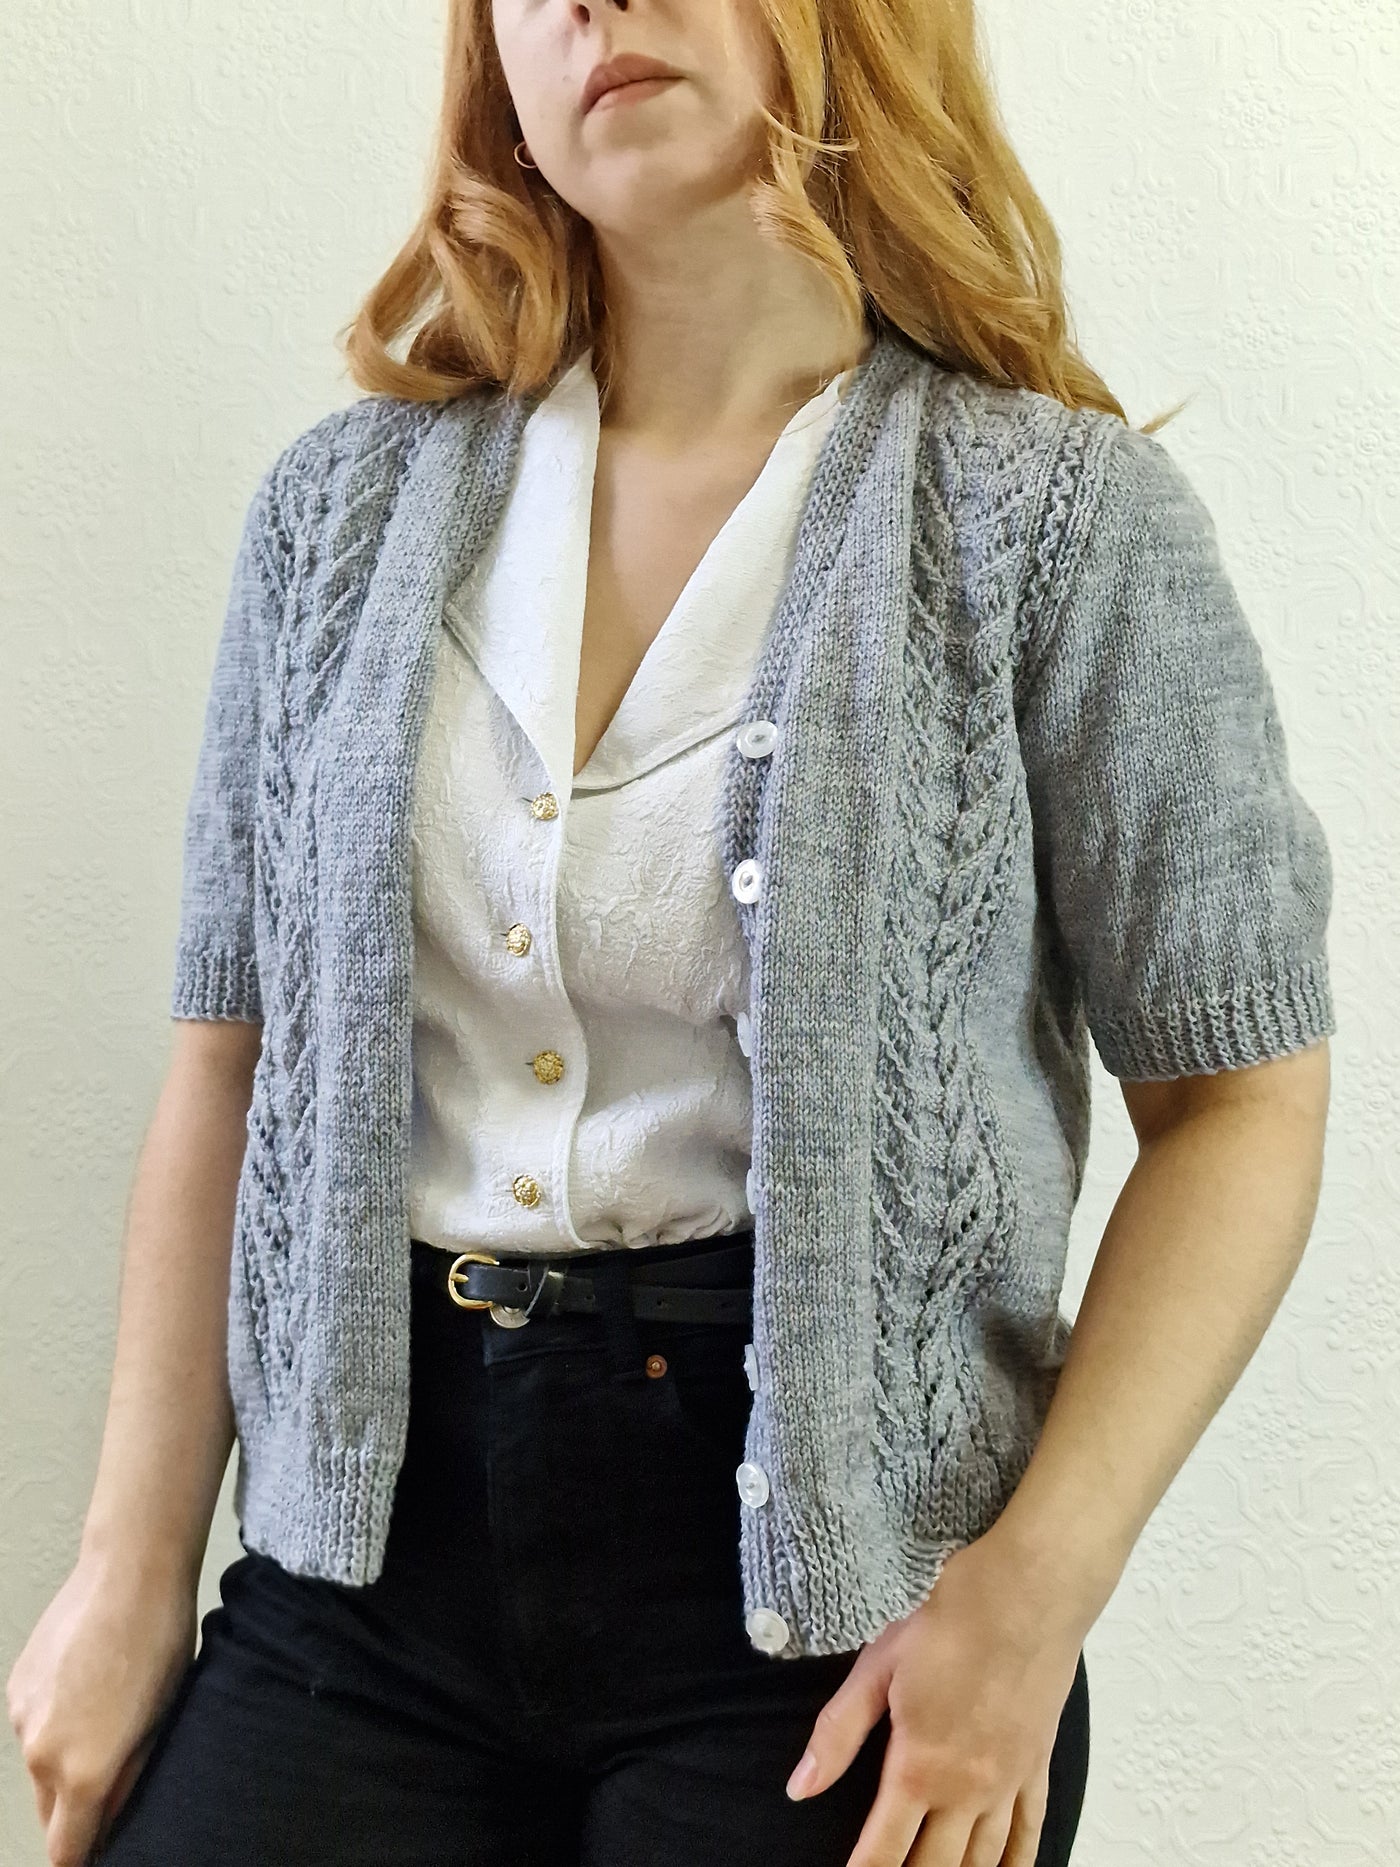 Vintage 80s Handknitted V-Neck Cardigan with Short Sleeves - S